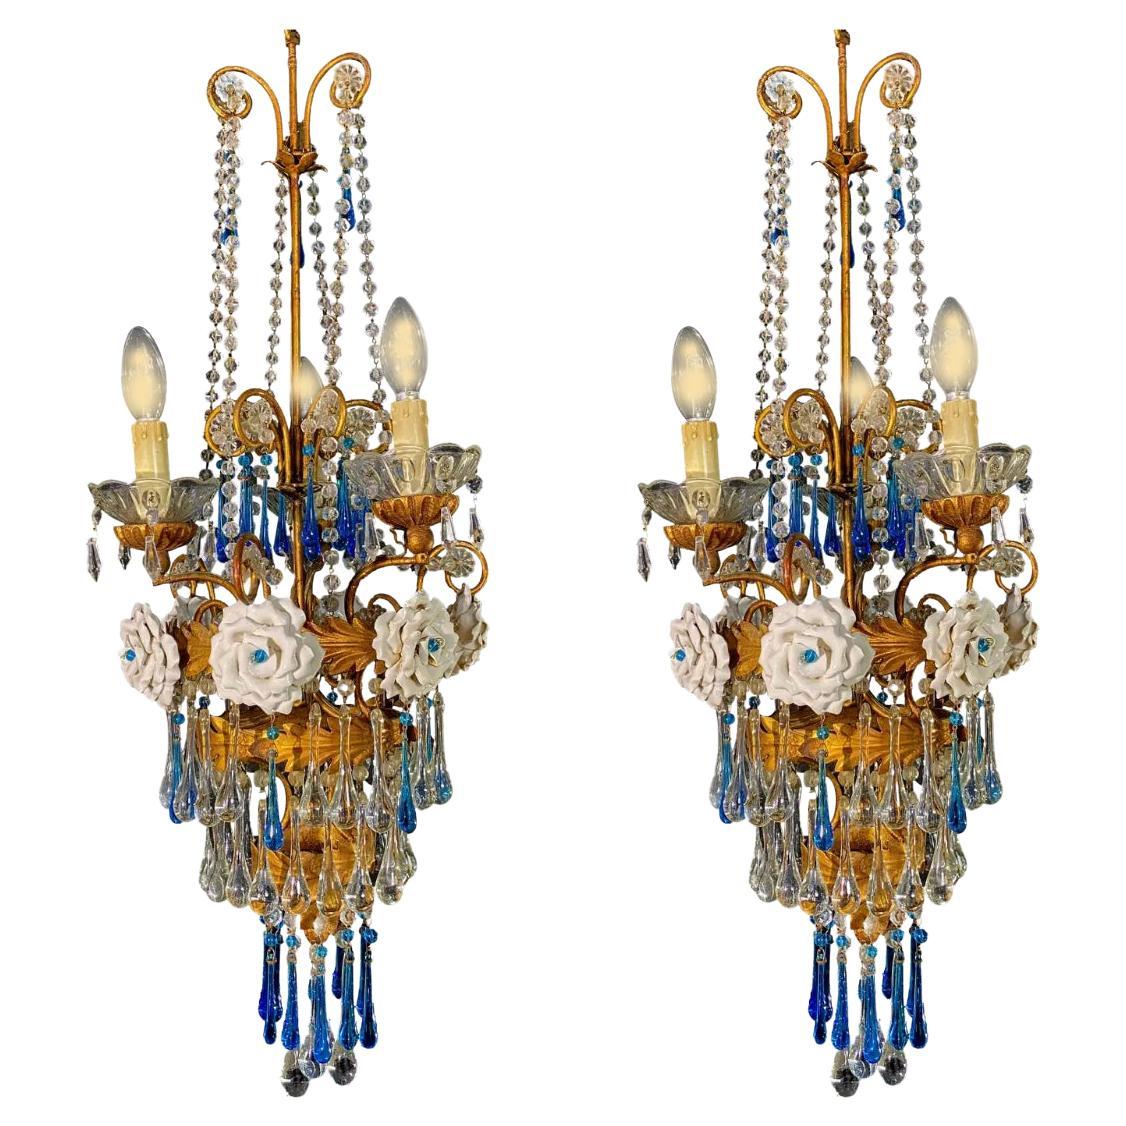 Pair of Lovely Chandeliers with White Roses and Blue Drops, Murano, 1950s For Sale